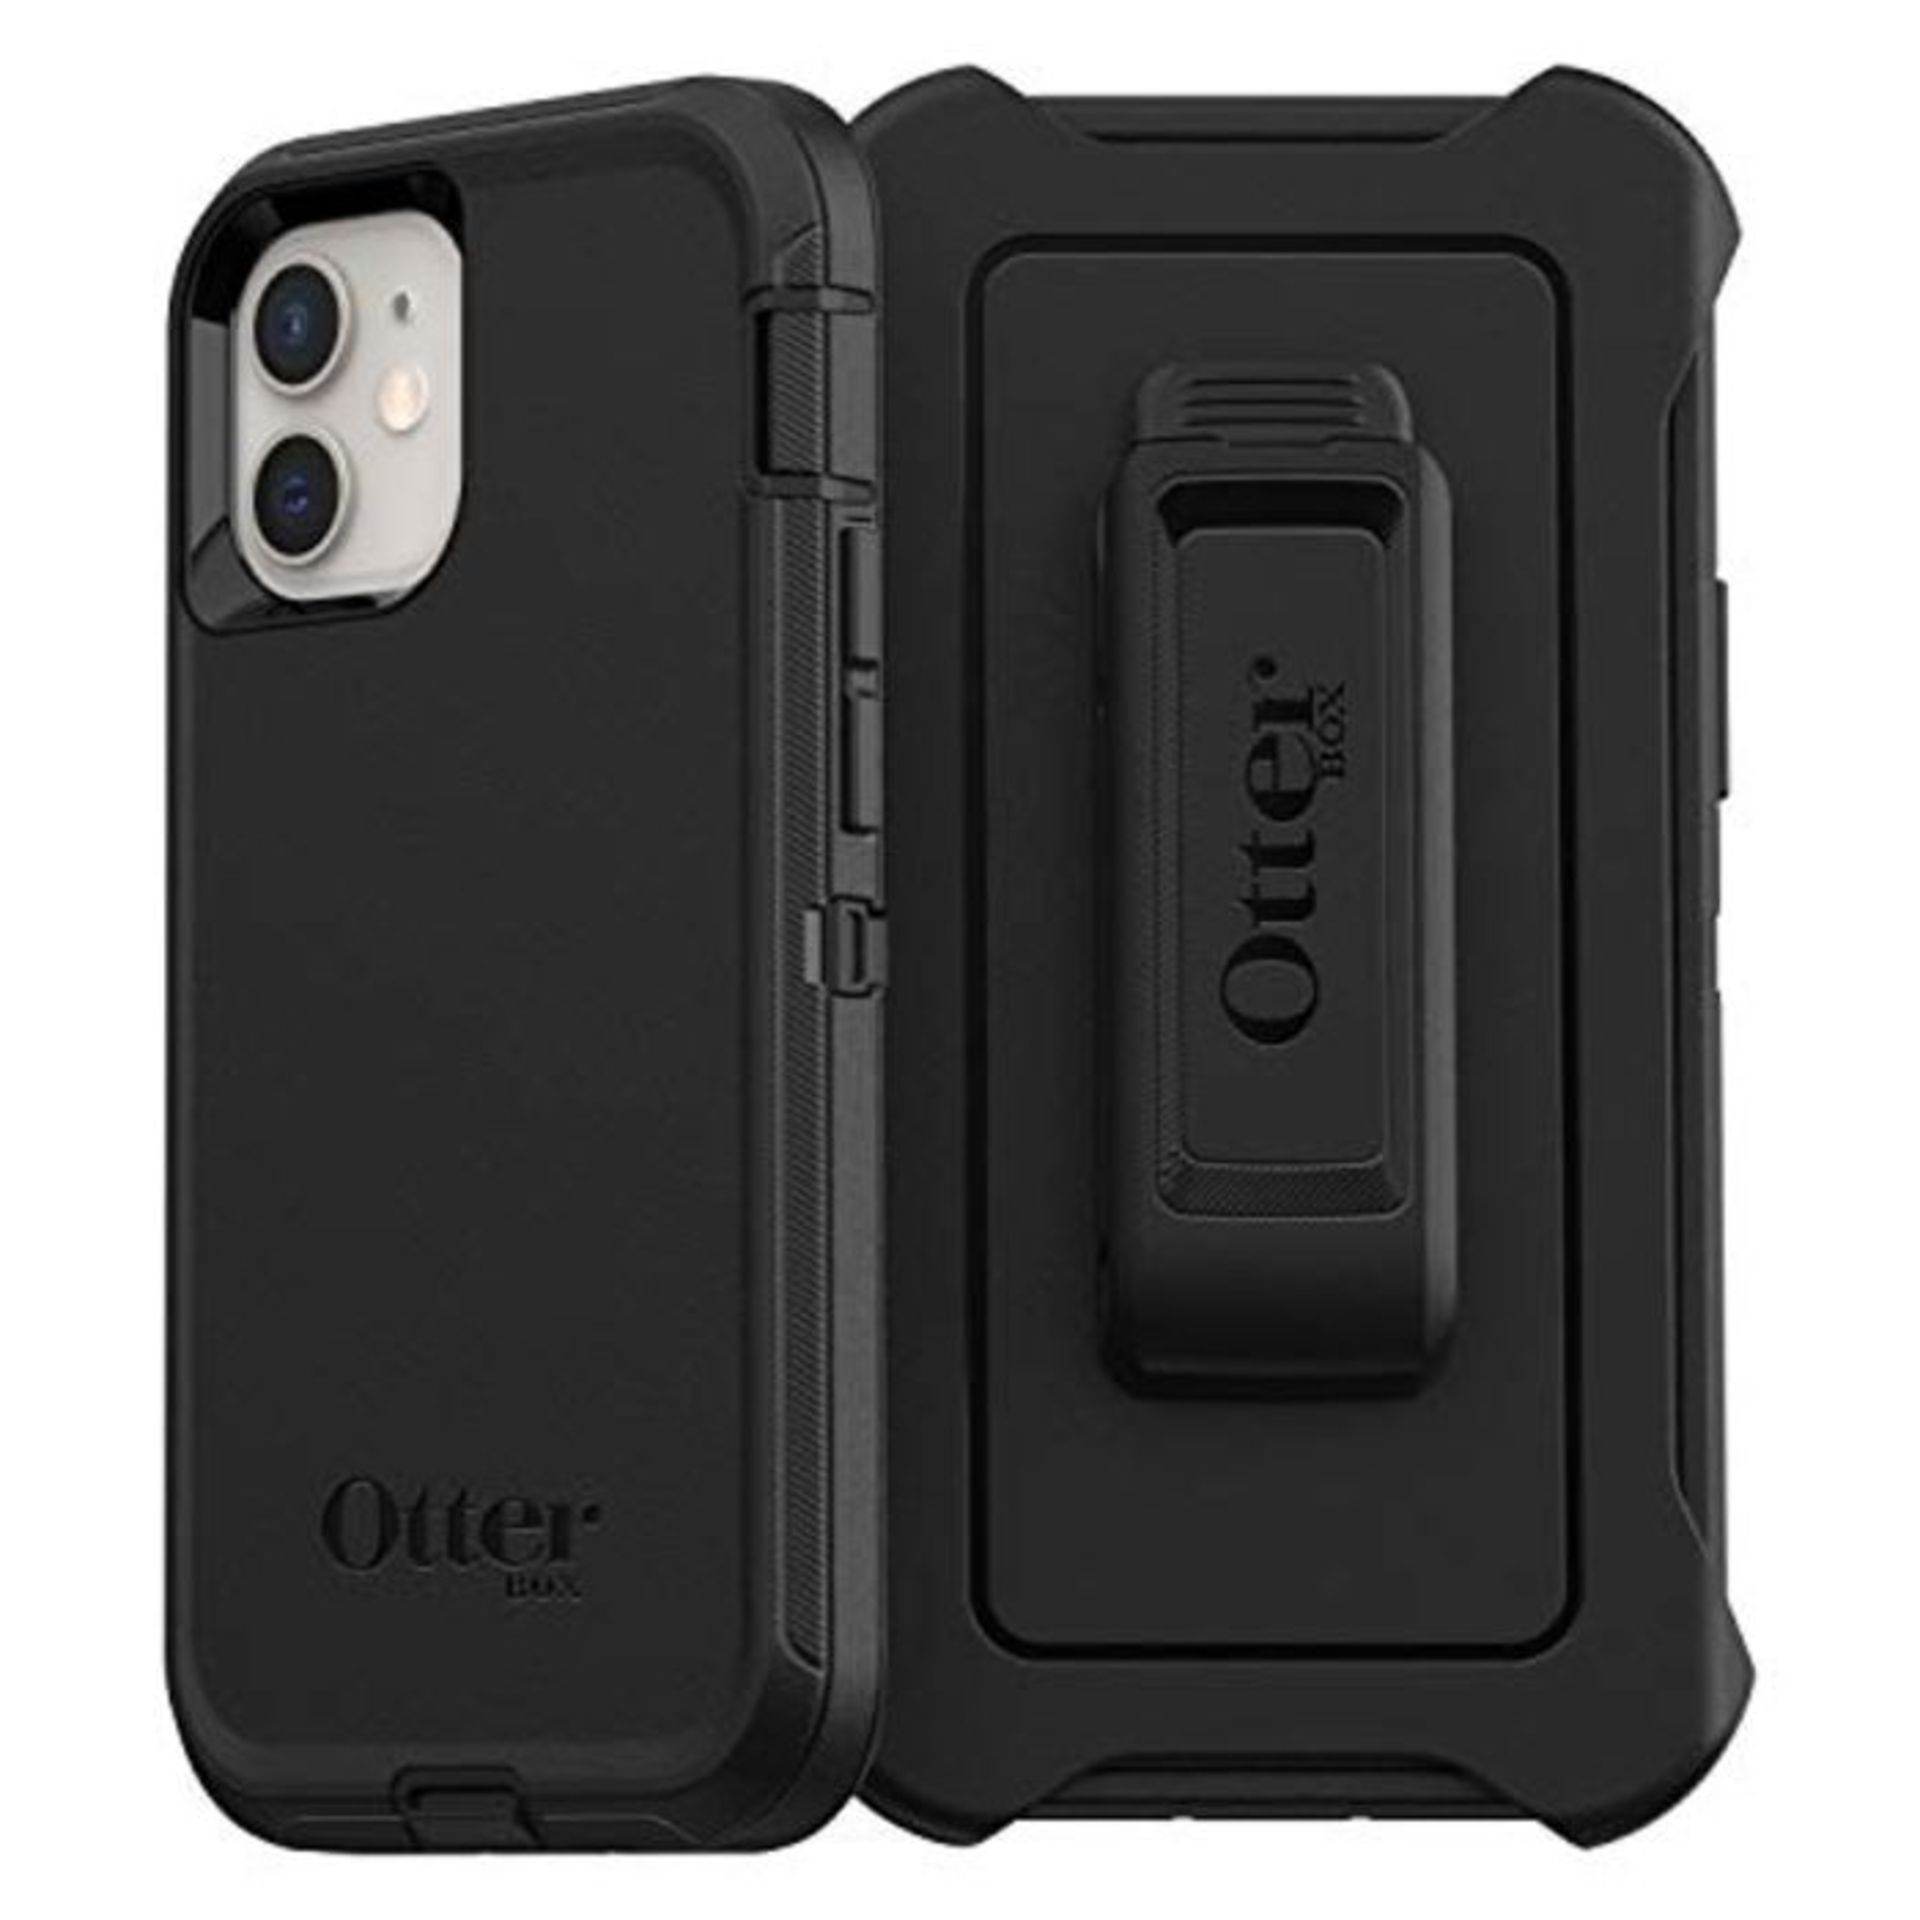 OtterBox for Apple iPhone 12 mini, Superior Rugged Protective Case, Defender Series, B